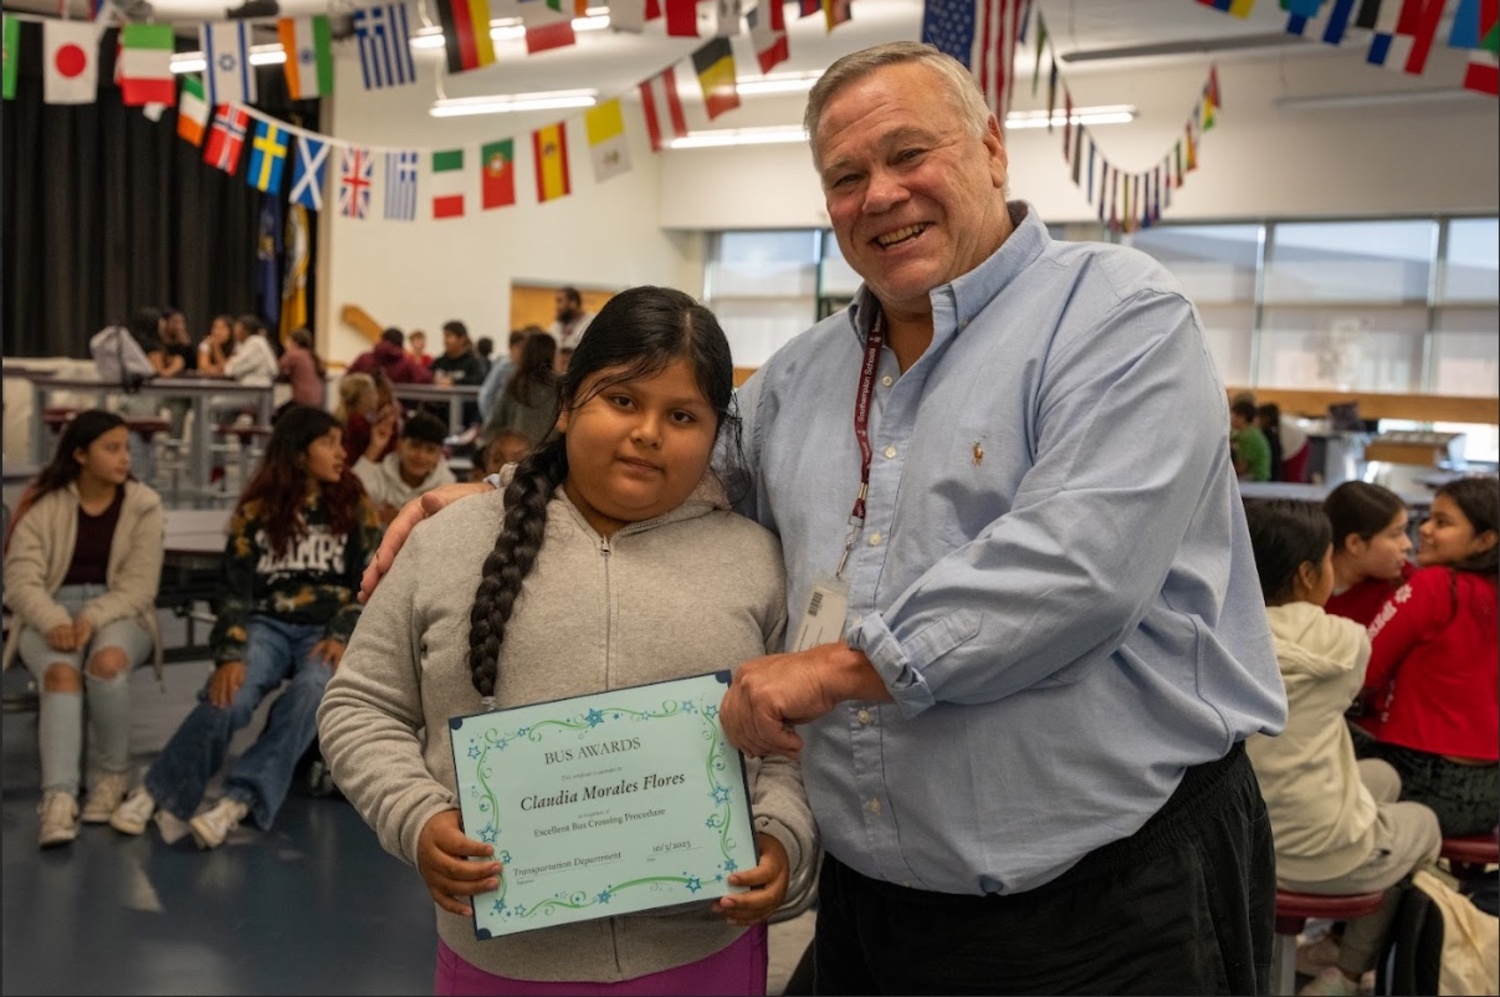 Southampton Intermediate School sixth grader Claudia Morales and her bus driver Rick Berkowski were recently recognized for following important bus safety procedures. Berkowski consistently reminds students that they must wait for a crossing signal from a bus driver before crossing the street to a bus. Morales did just that recently when Berkowski noticed a passing car that was not yielding to the flashing lights and the bus stop sign. Morales exhibited great listening skills and waited for Berkowski’s signal, ensuring her safety. COURTESY SOUTHAMPTON SCHOOL DISTRICT